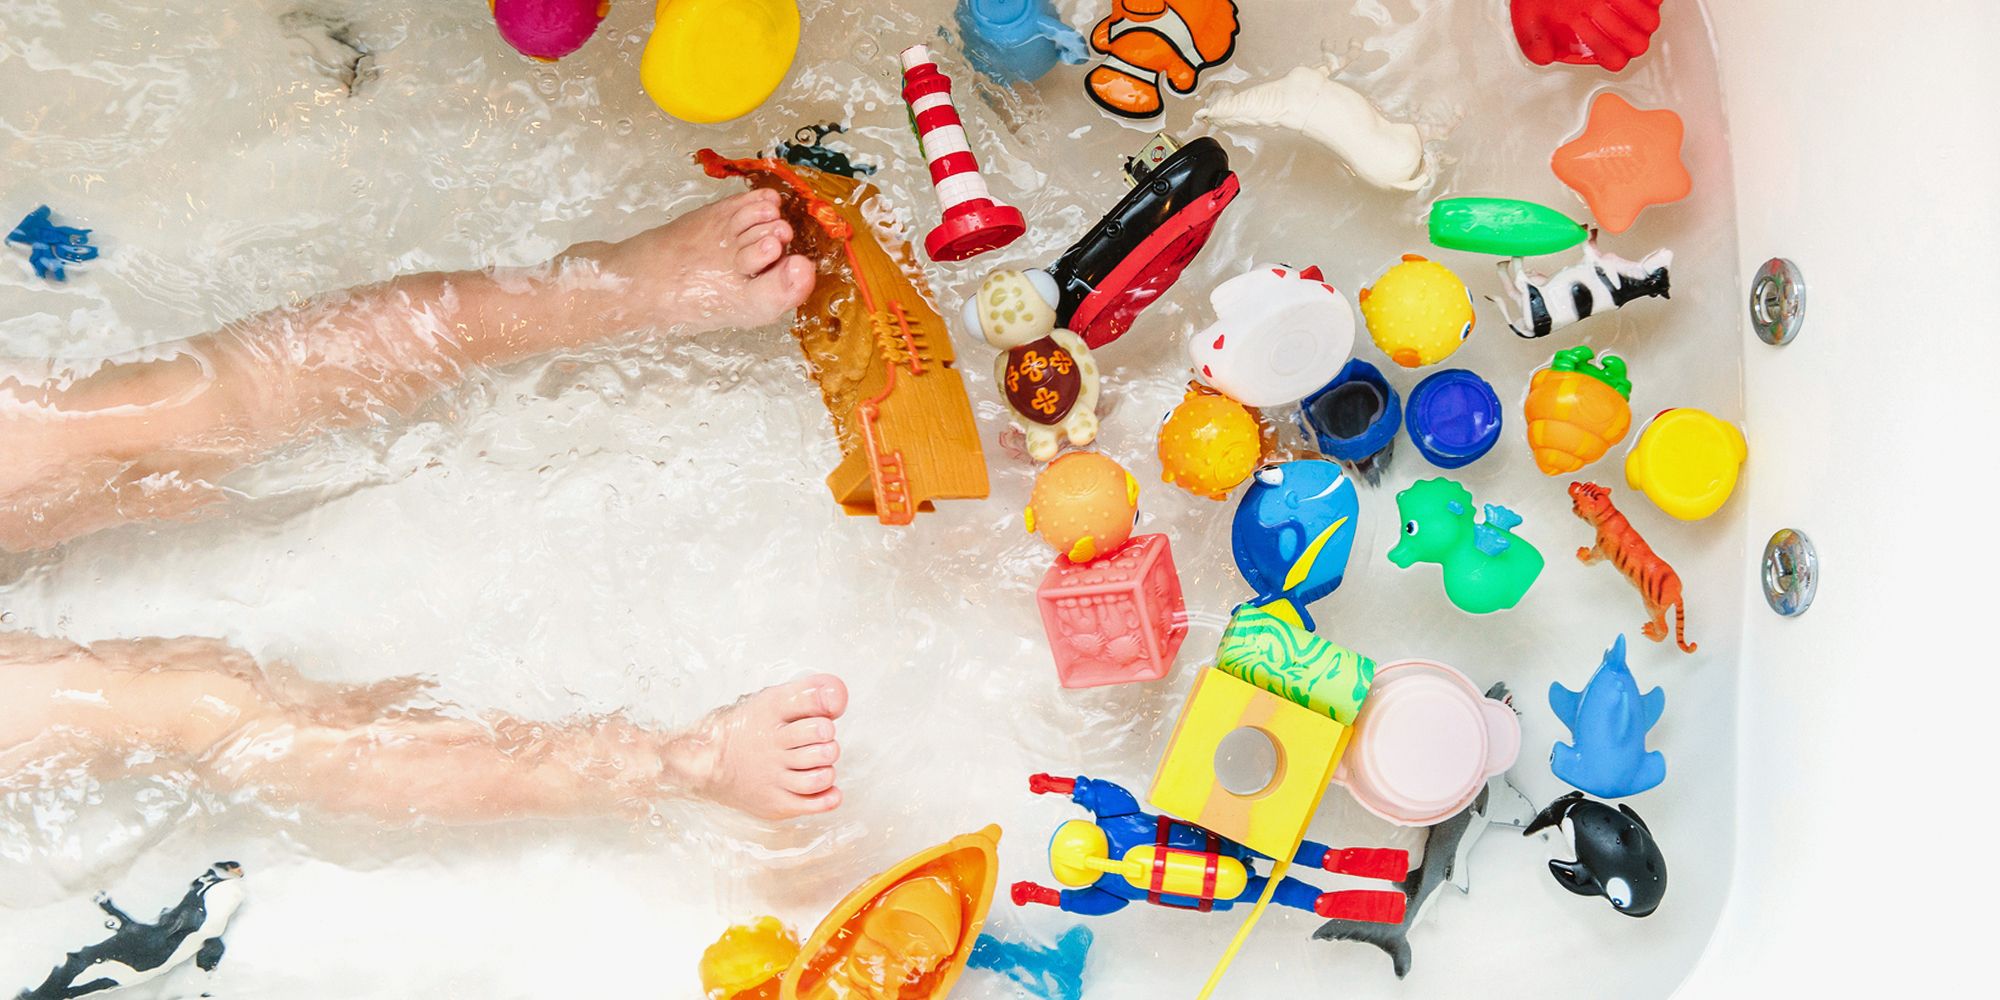 Yookidoo Submarine Spray Station - Bath Toy - with A Water Pumping System and Hand Shower Best Toy for Babies and Toddlers